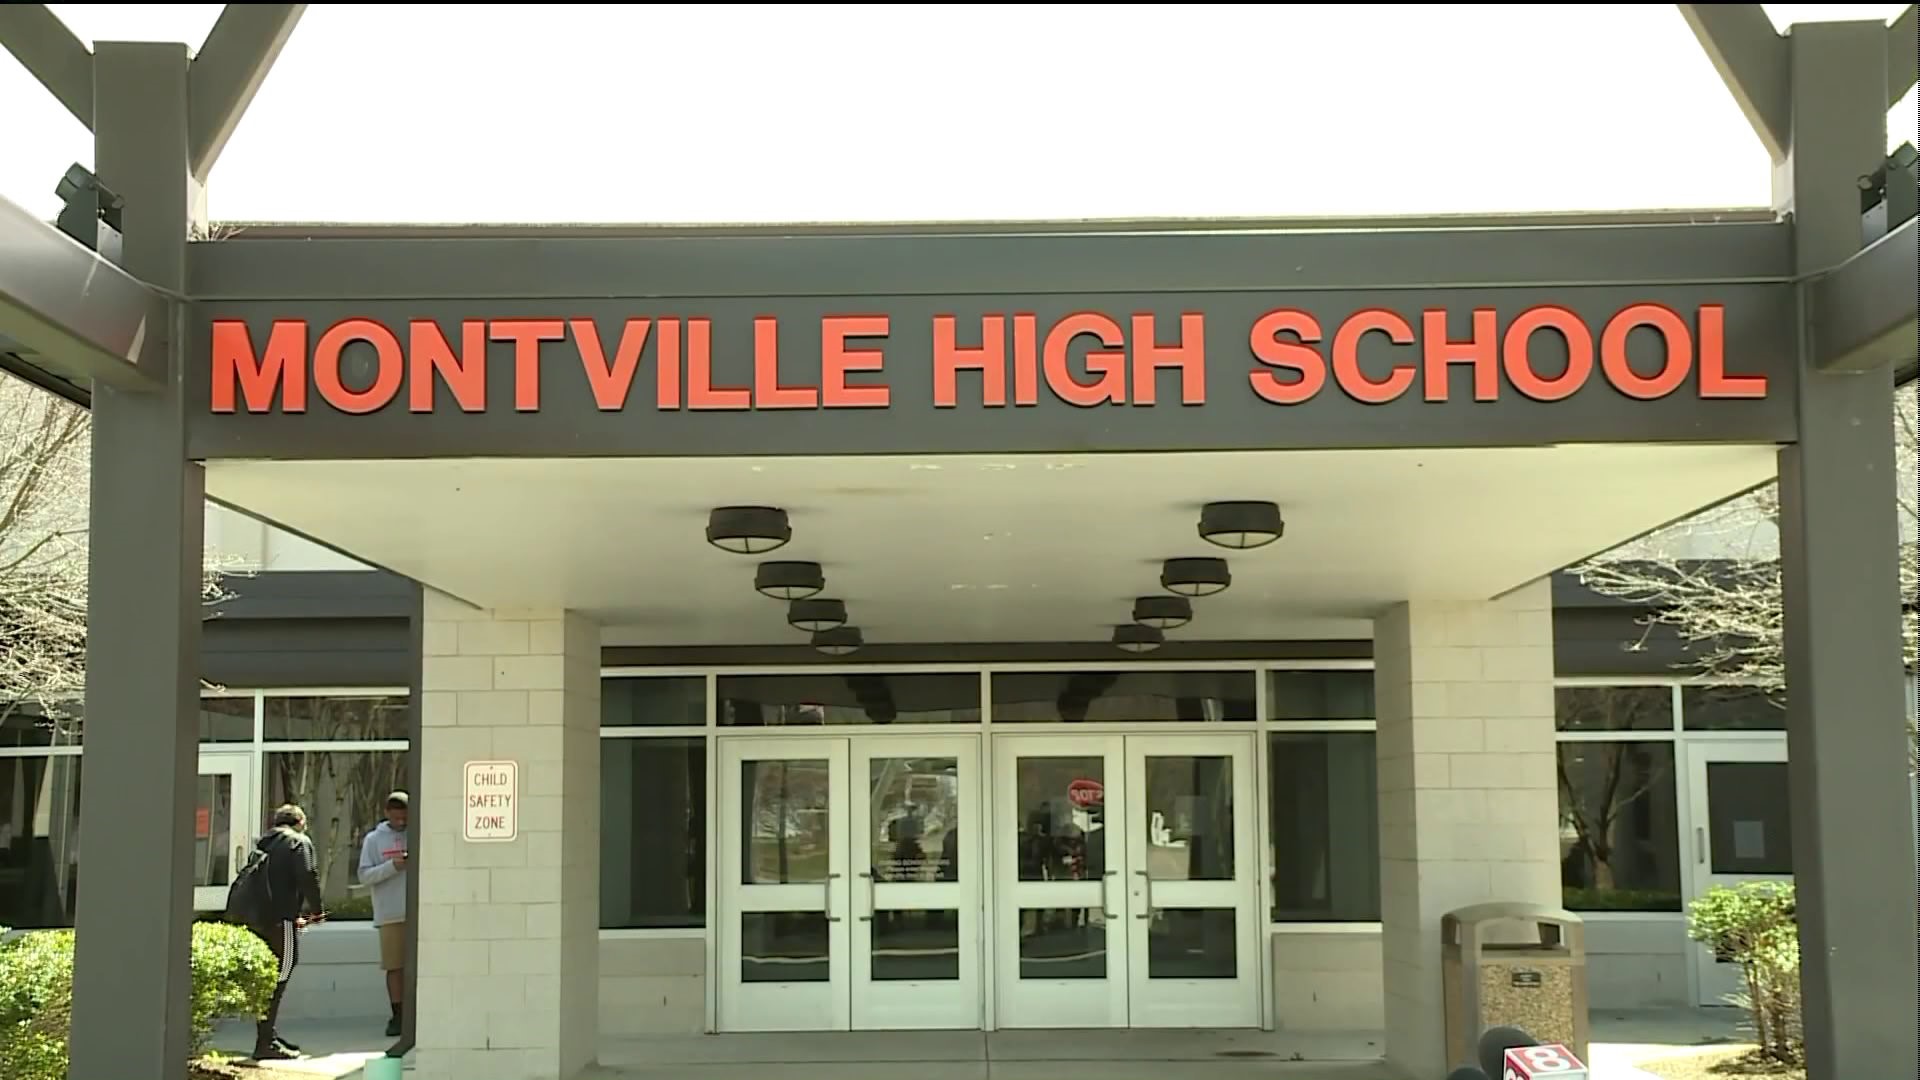 Montville Board of Ed meeting draws criticism, praise for district amid scandals